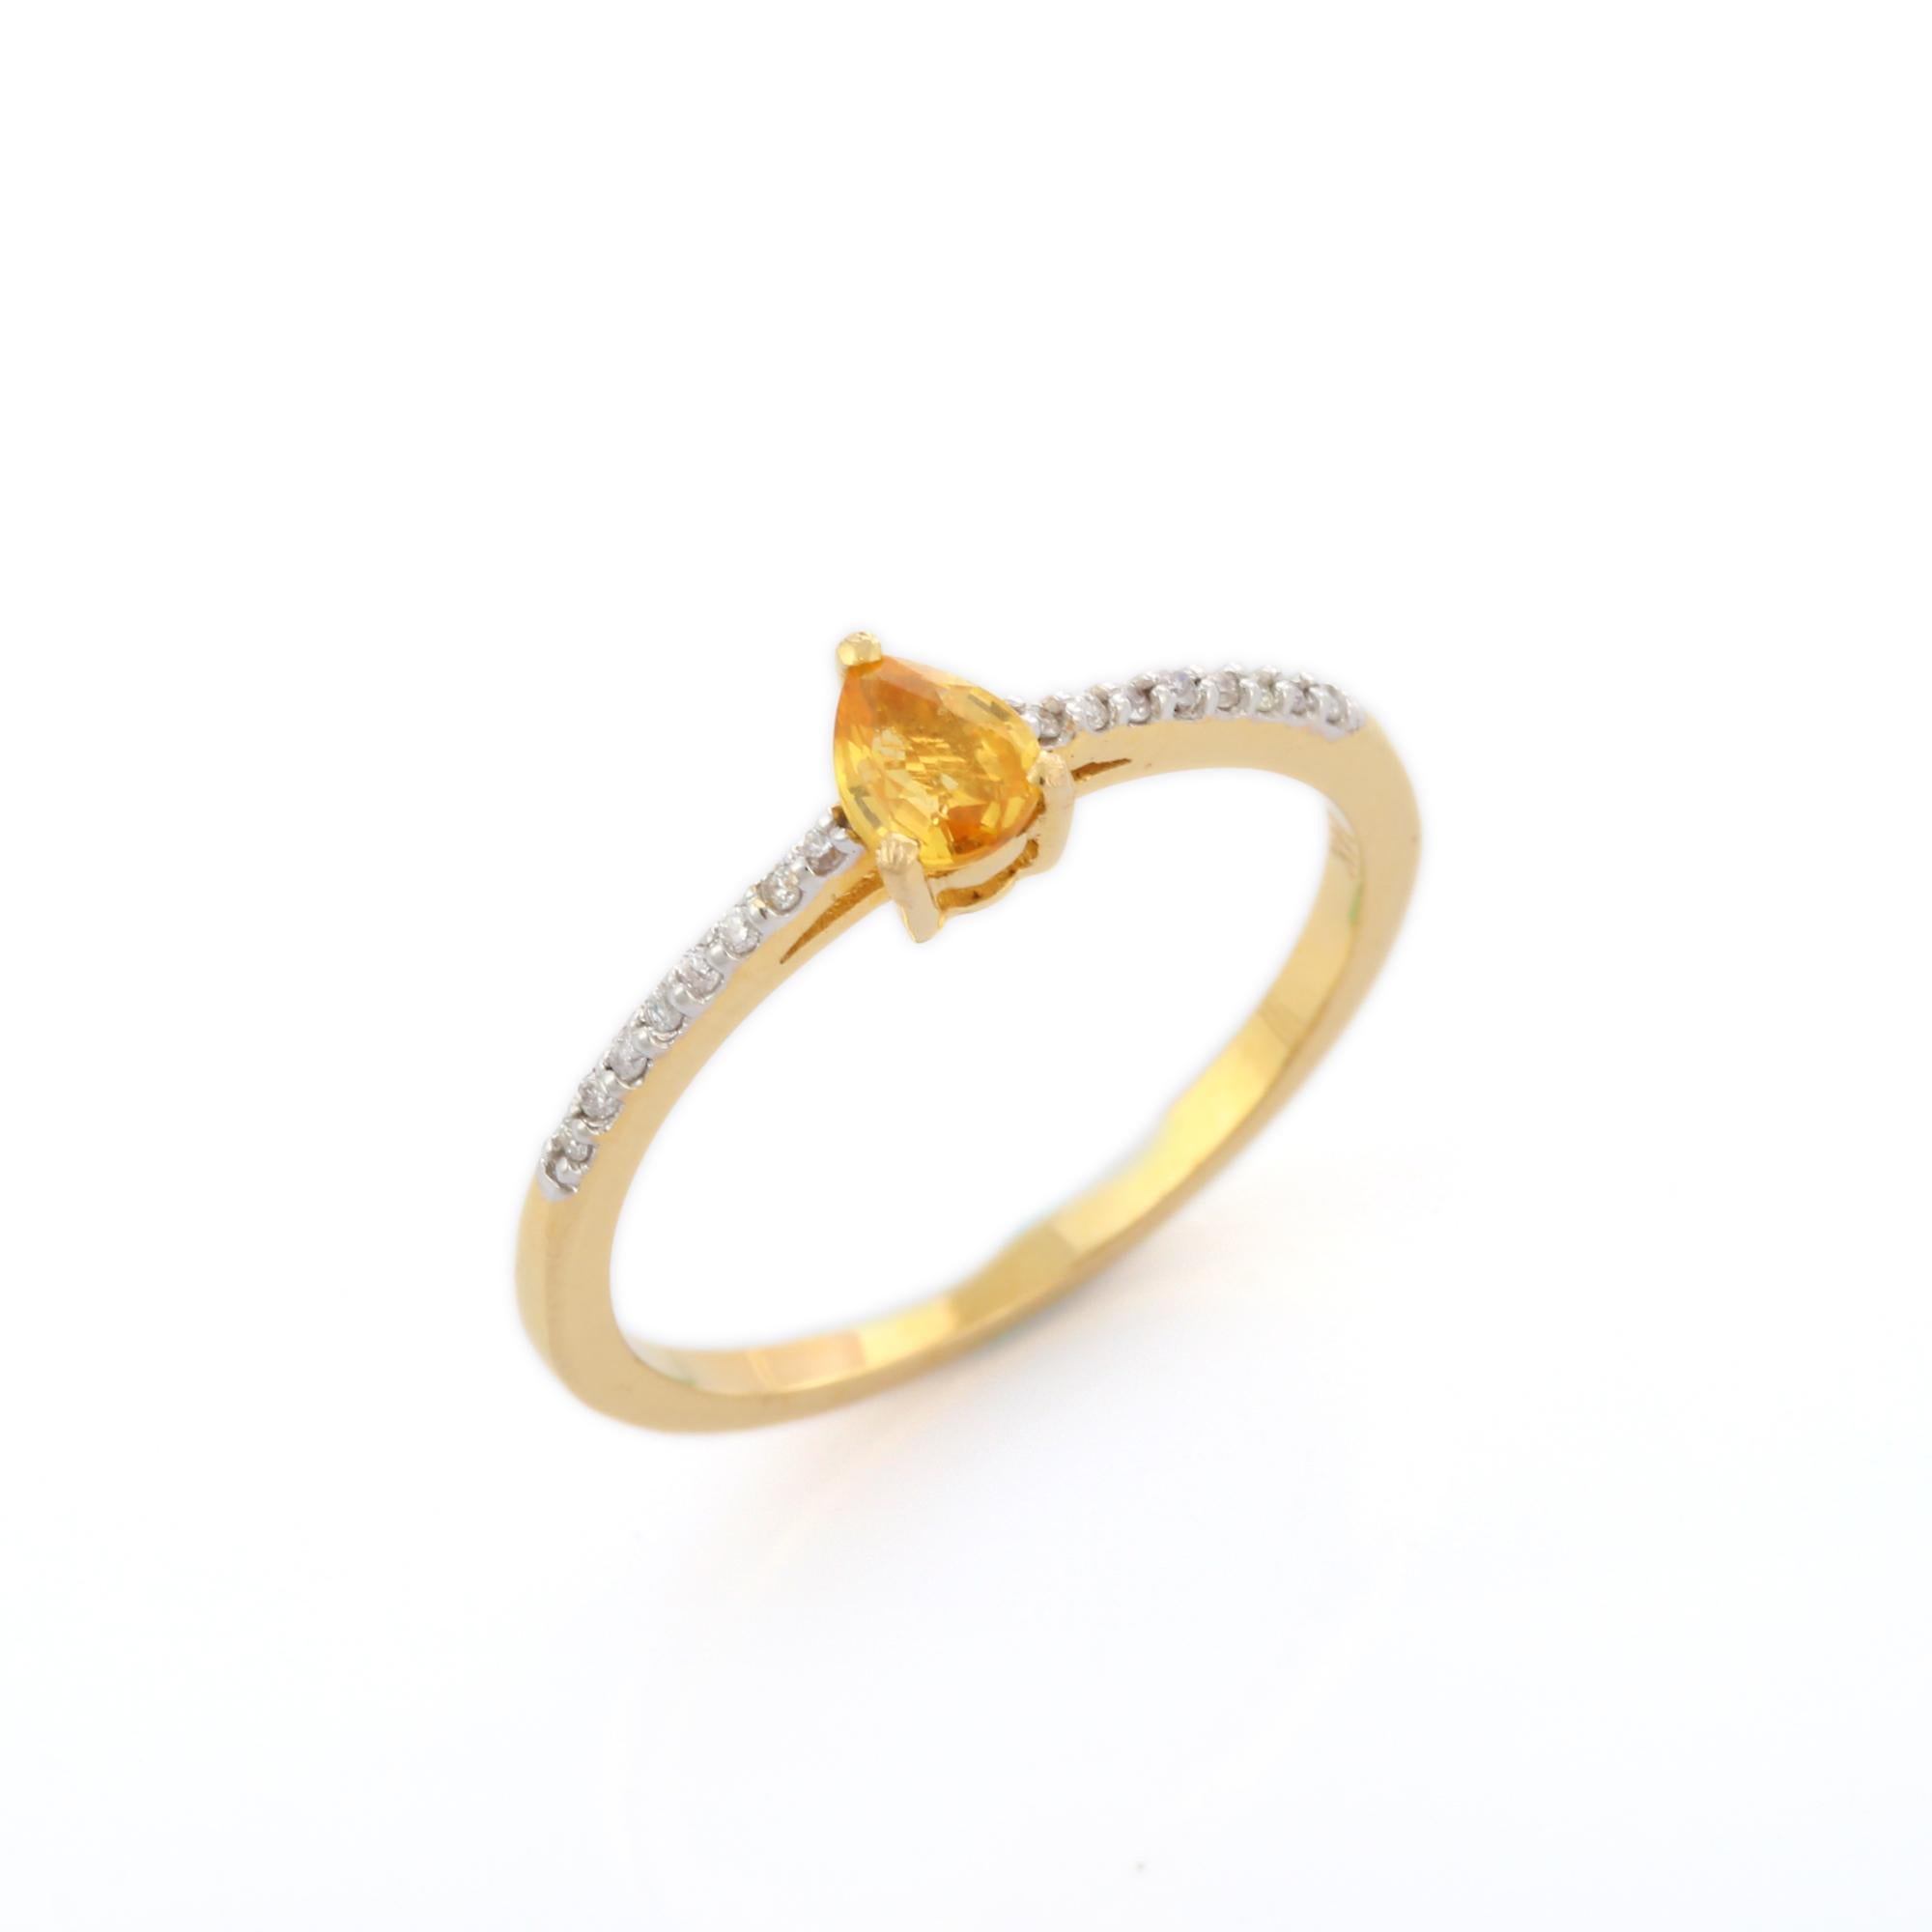 For Sale:  Pear Cut Yellow Sapphire and Diamond Statement Ring in 14K Yellow Gold   7